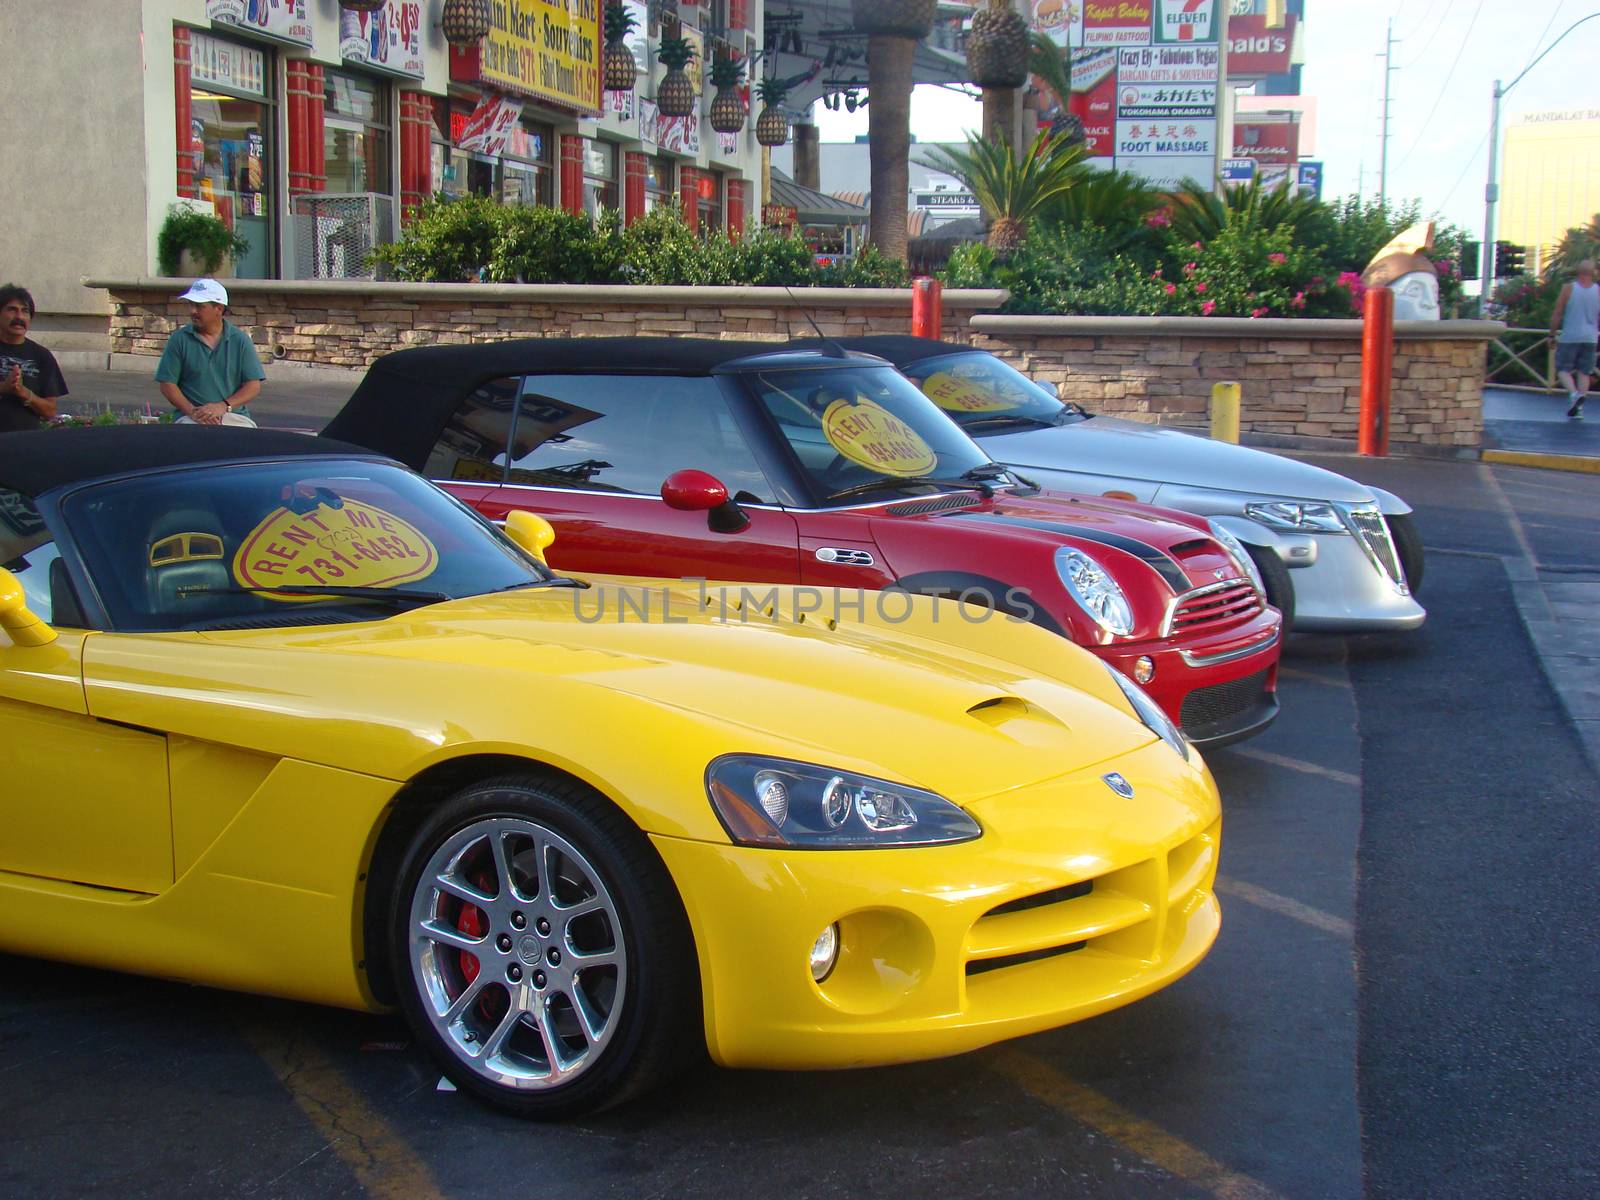 Colorful Cars for Rent in Las Vegas by bensib